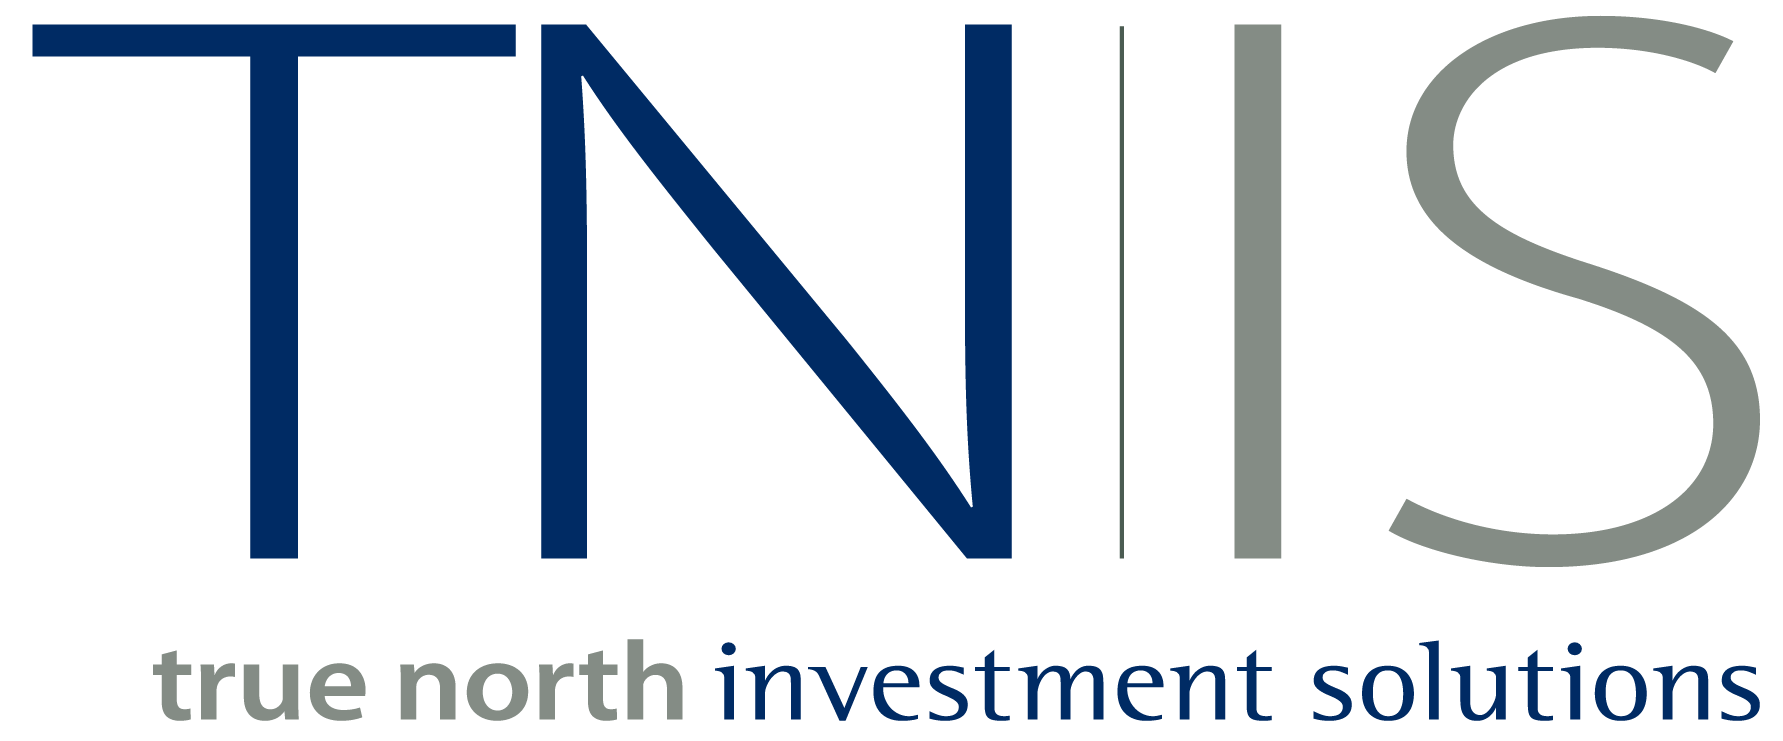 True North Investment Solutions